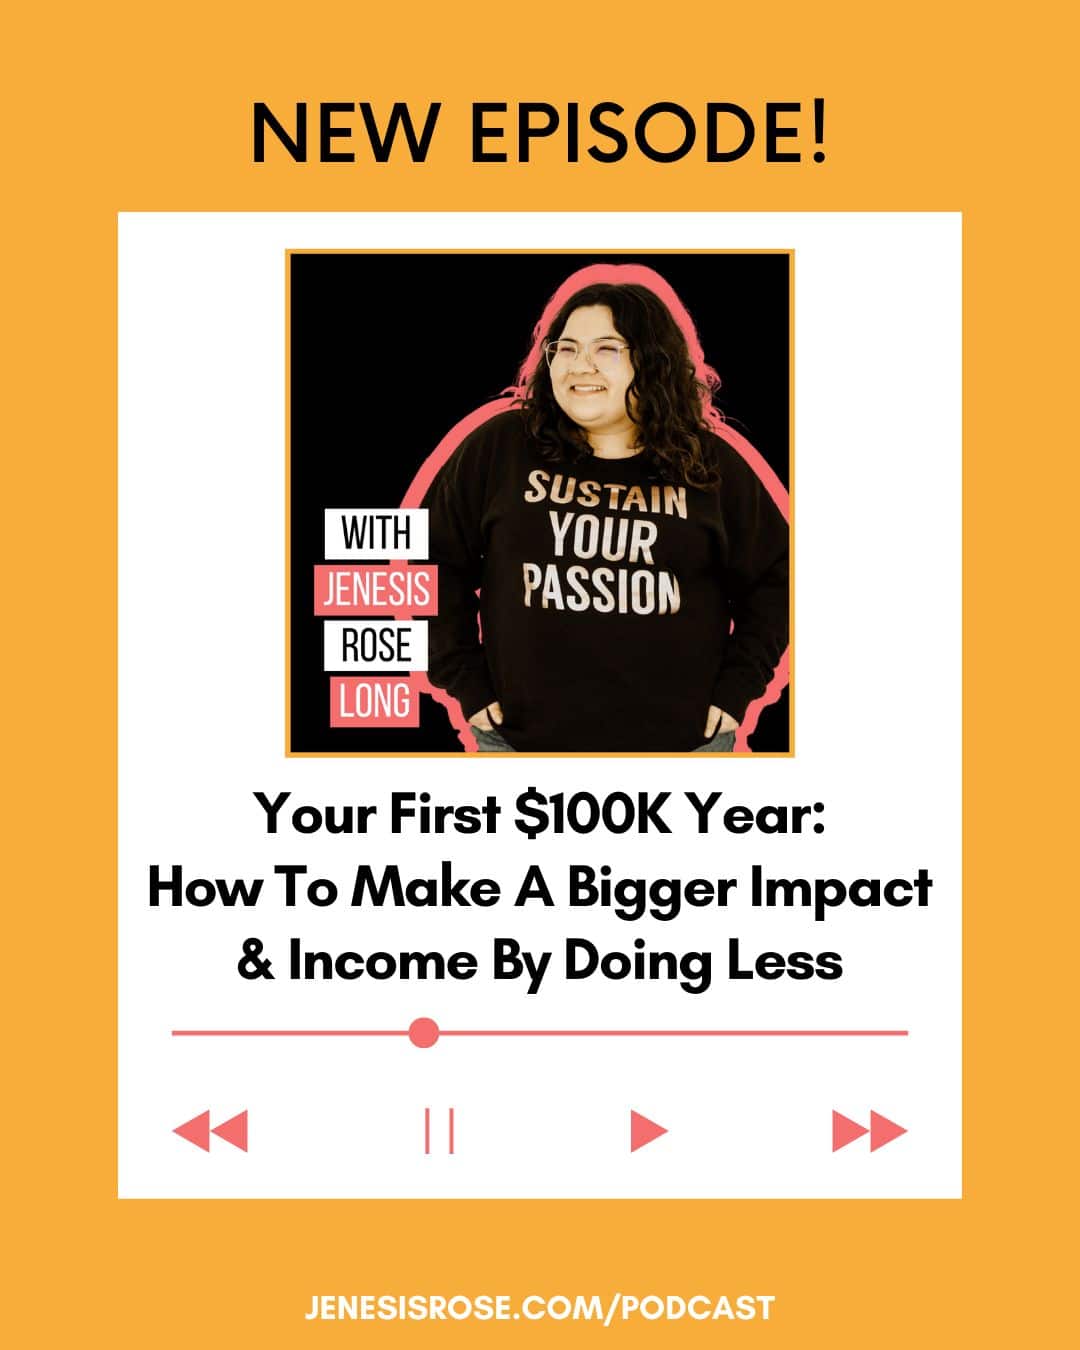 Your First $100K Year: How To Make A Bigger Impact & Income By Doing Less